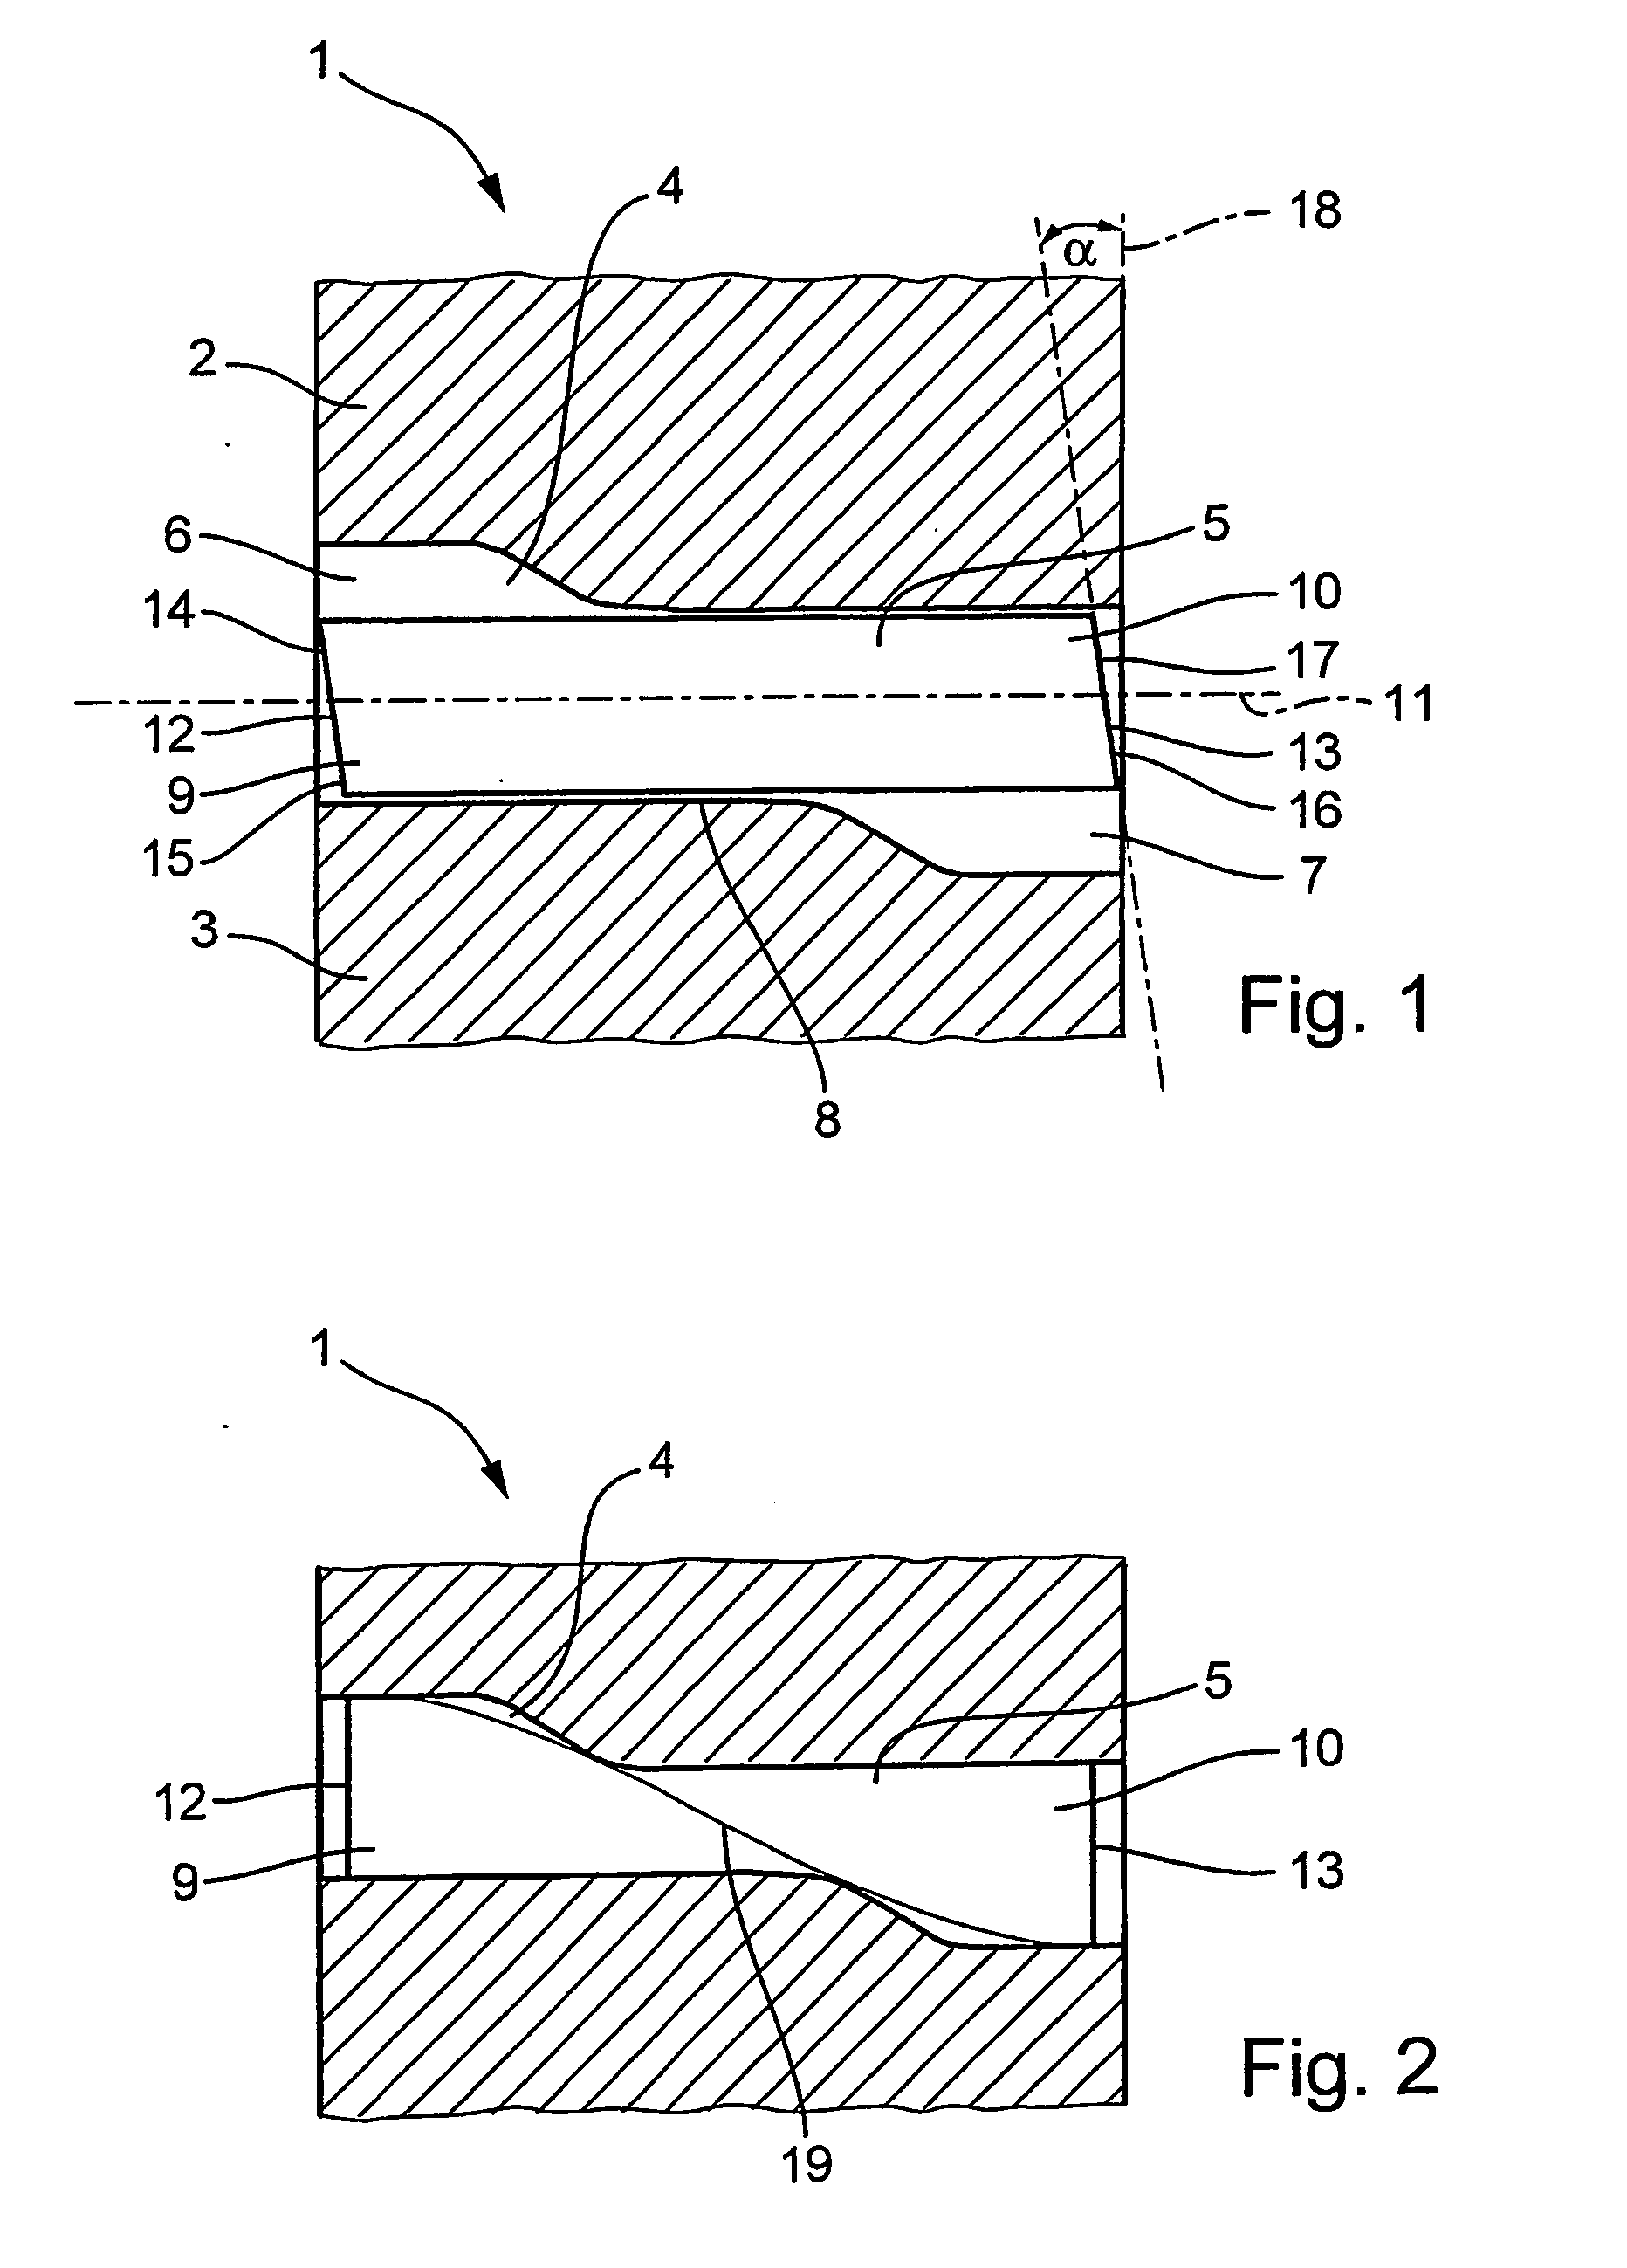 Method for producing a peripherally closed hollow profield element